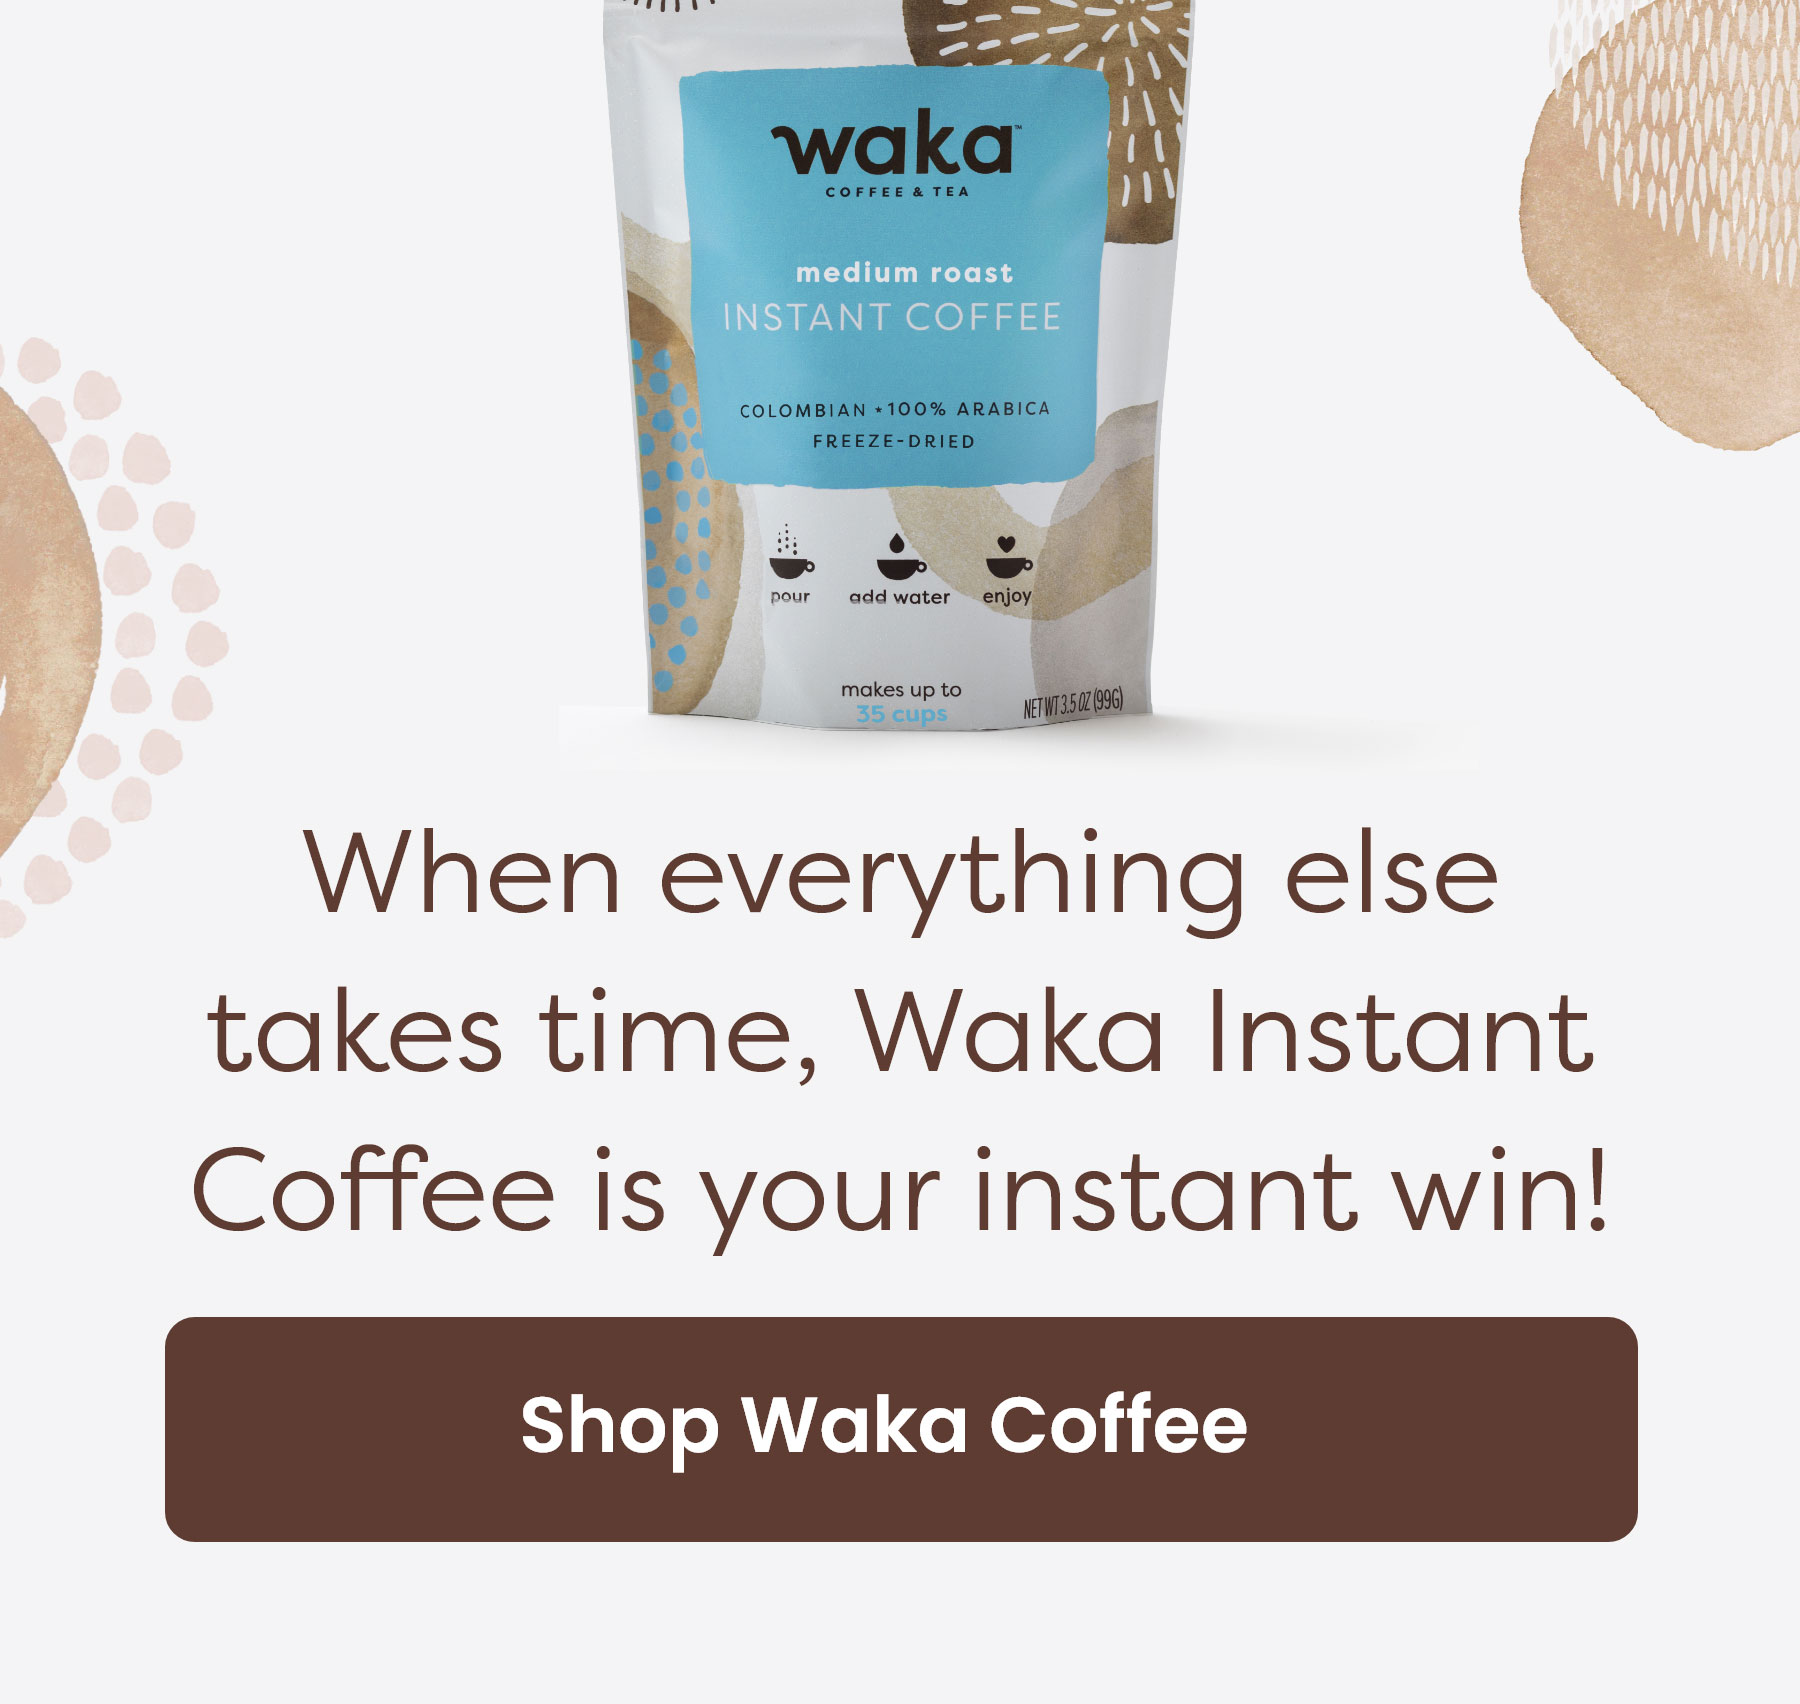 When everything else takes time, Waka Instant Coffee is your instant win! [Shop Waka Coffee]